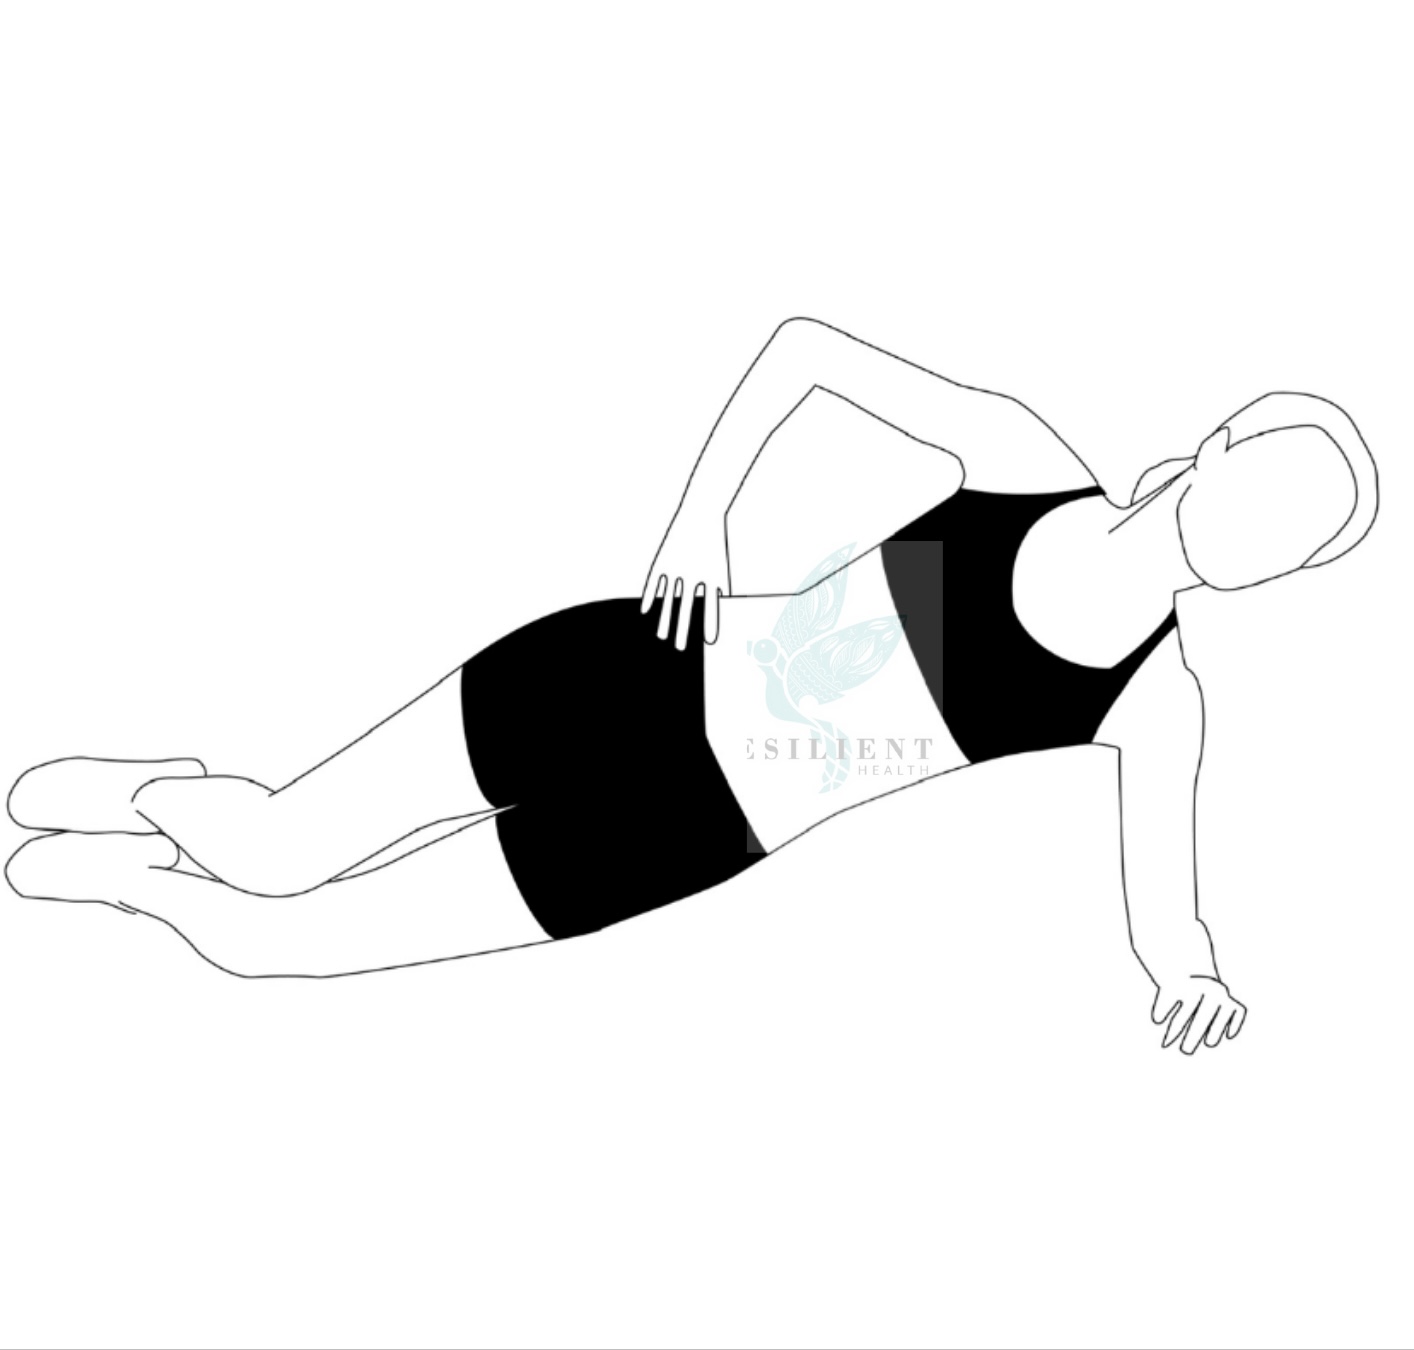 side_plank-_-adelaide-osteopath-resilient-health-chiropractor-massage-osteopathy.jpg